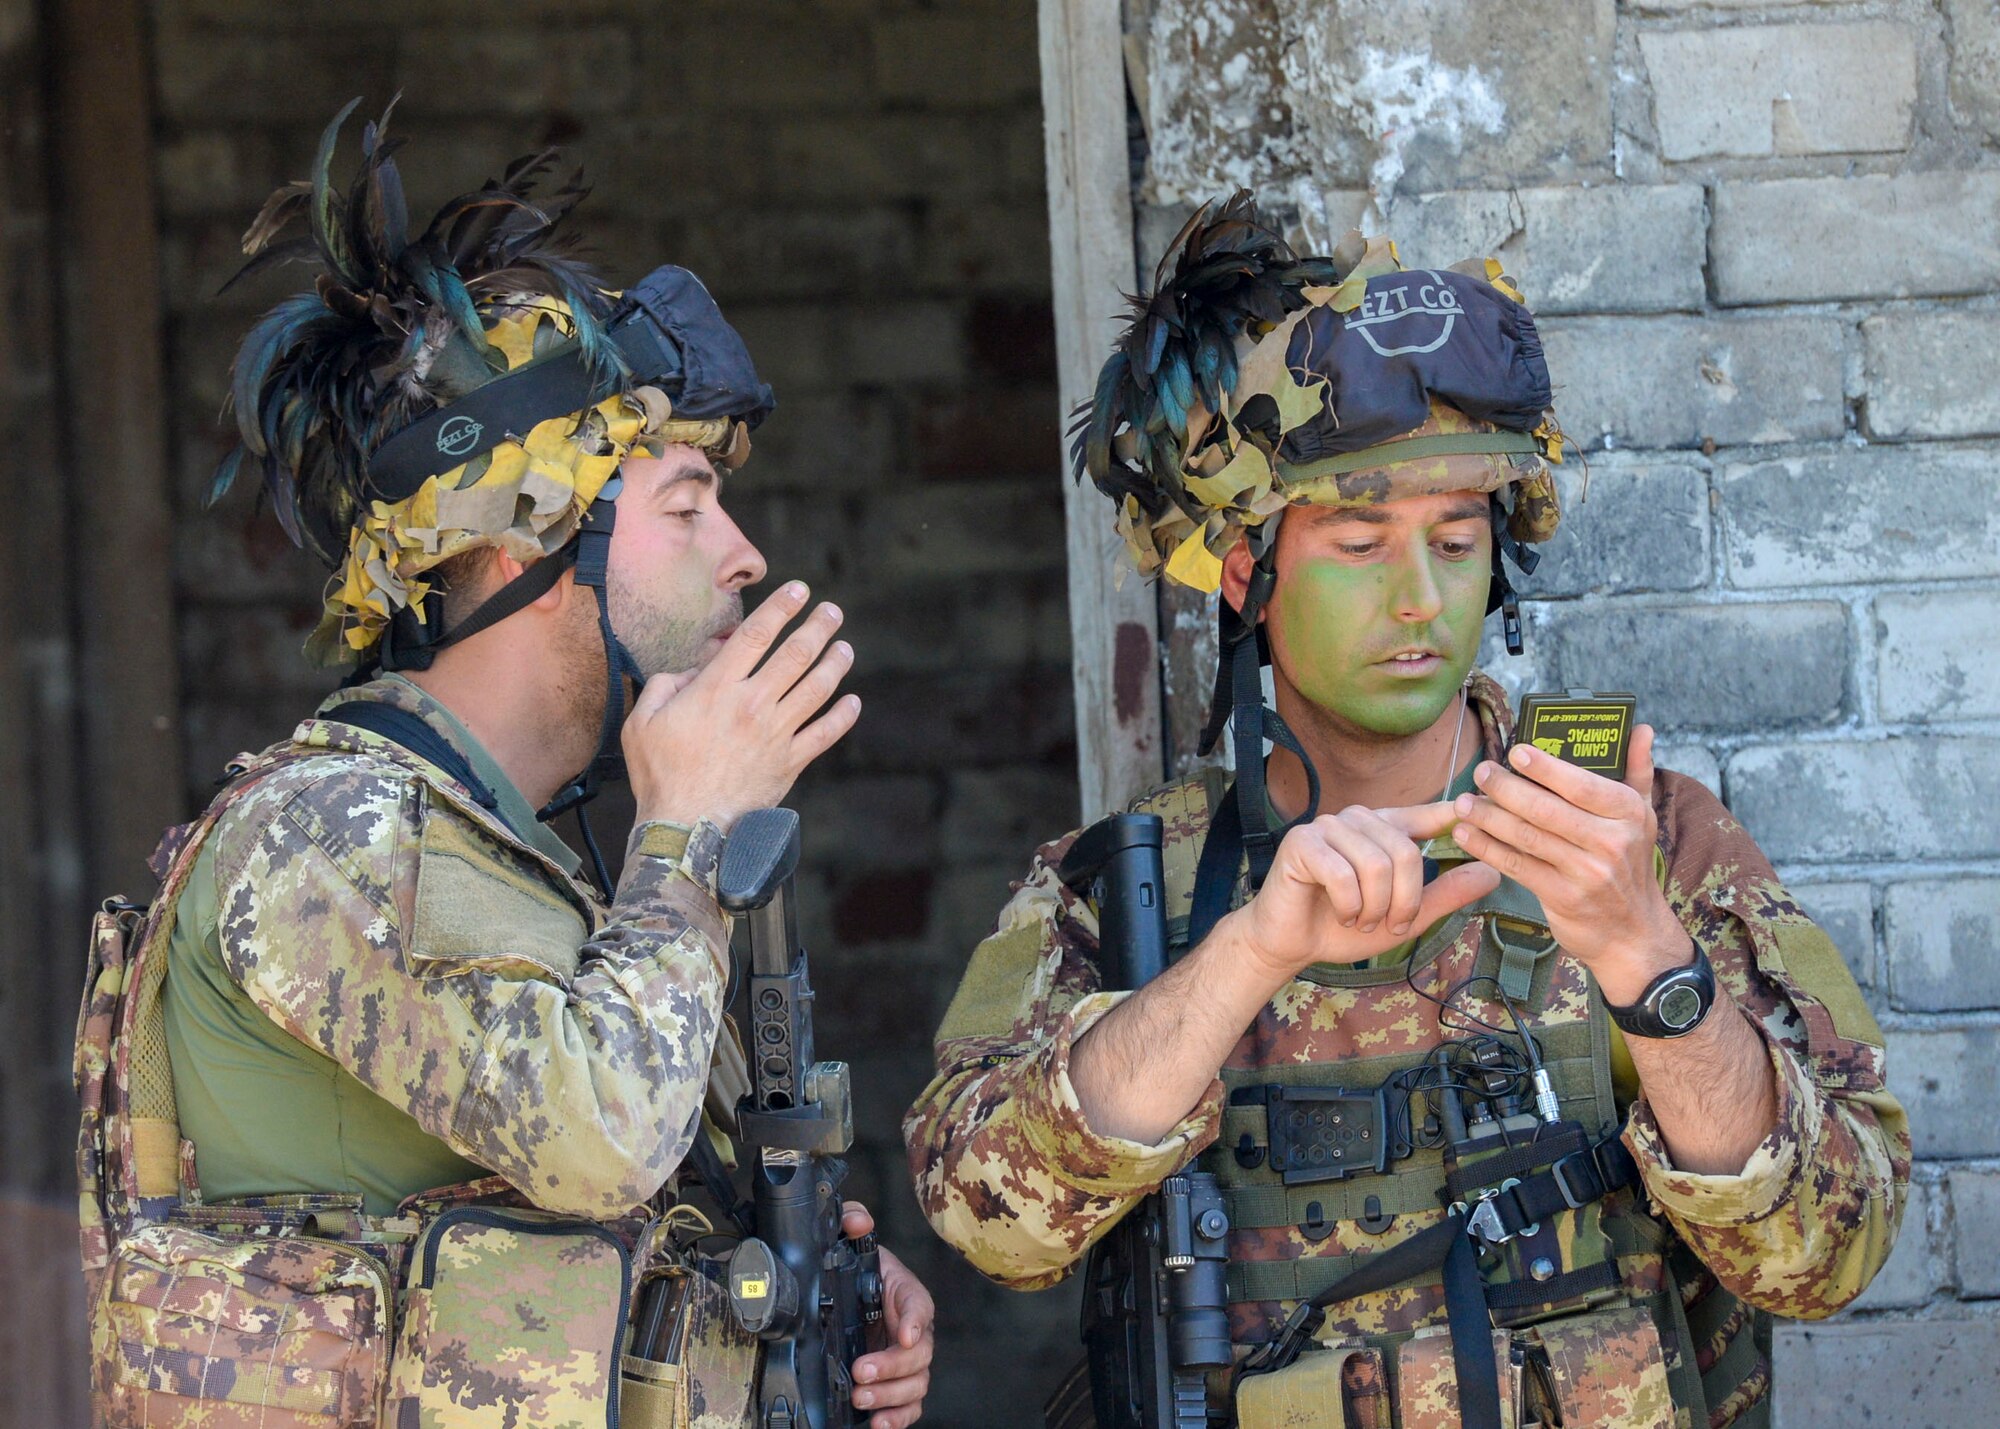 Italian Forces apply camouflage before a large scale exercise in Skrunda, Latvia on June 13, 2018. The exercise was a part of Saber Strike 18 and featured a defending force comprised of Spanish, Italian, Canadian and Latvian Platoons; and an attacking force comprised of U.S. Marines, United Kingdom Royal Marines, Michigan Army National Guard, and Norwegian Forces. Saber Strike 18 is the eighth iteration of the long-standing U.S. Army Europe-led cooperative training exercise enhancing interoperability among allies and regional partners. (U.S. Air Force photo by Staff Sgt. Jimmie D. Pike)